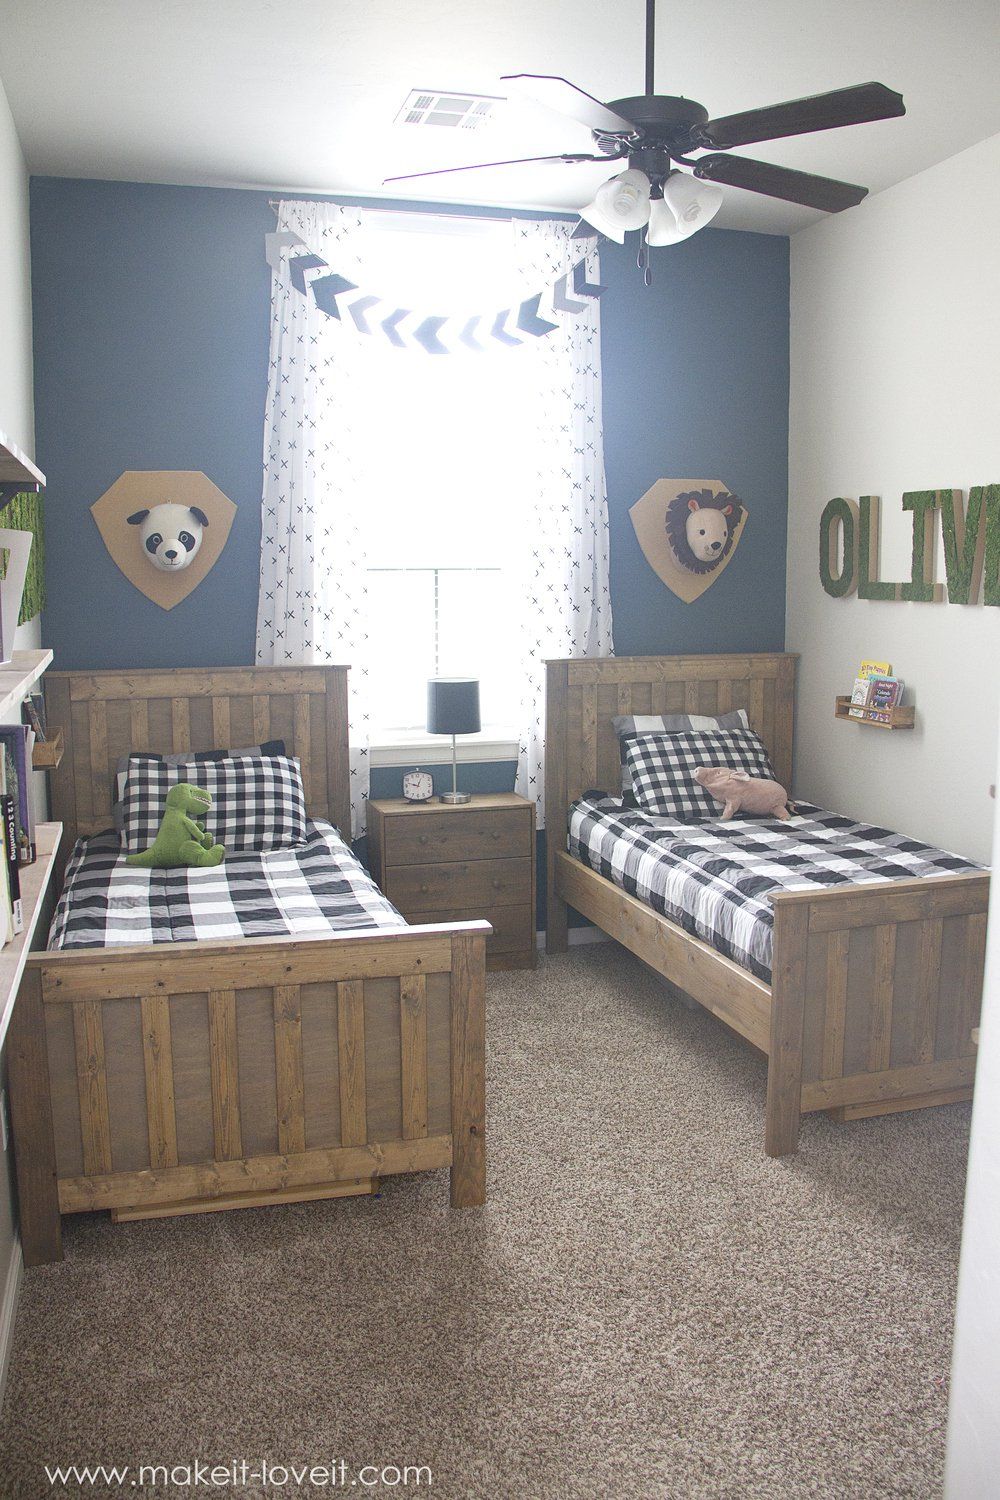 Ideas for a Shared BOYS Bedroom (yay, all done!!) | via  www.Traveller Location